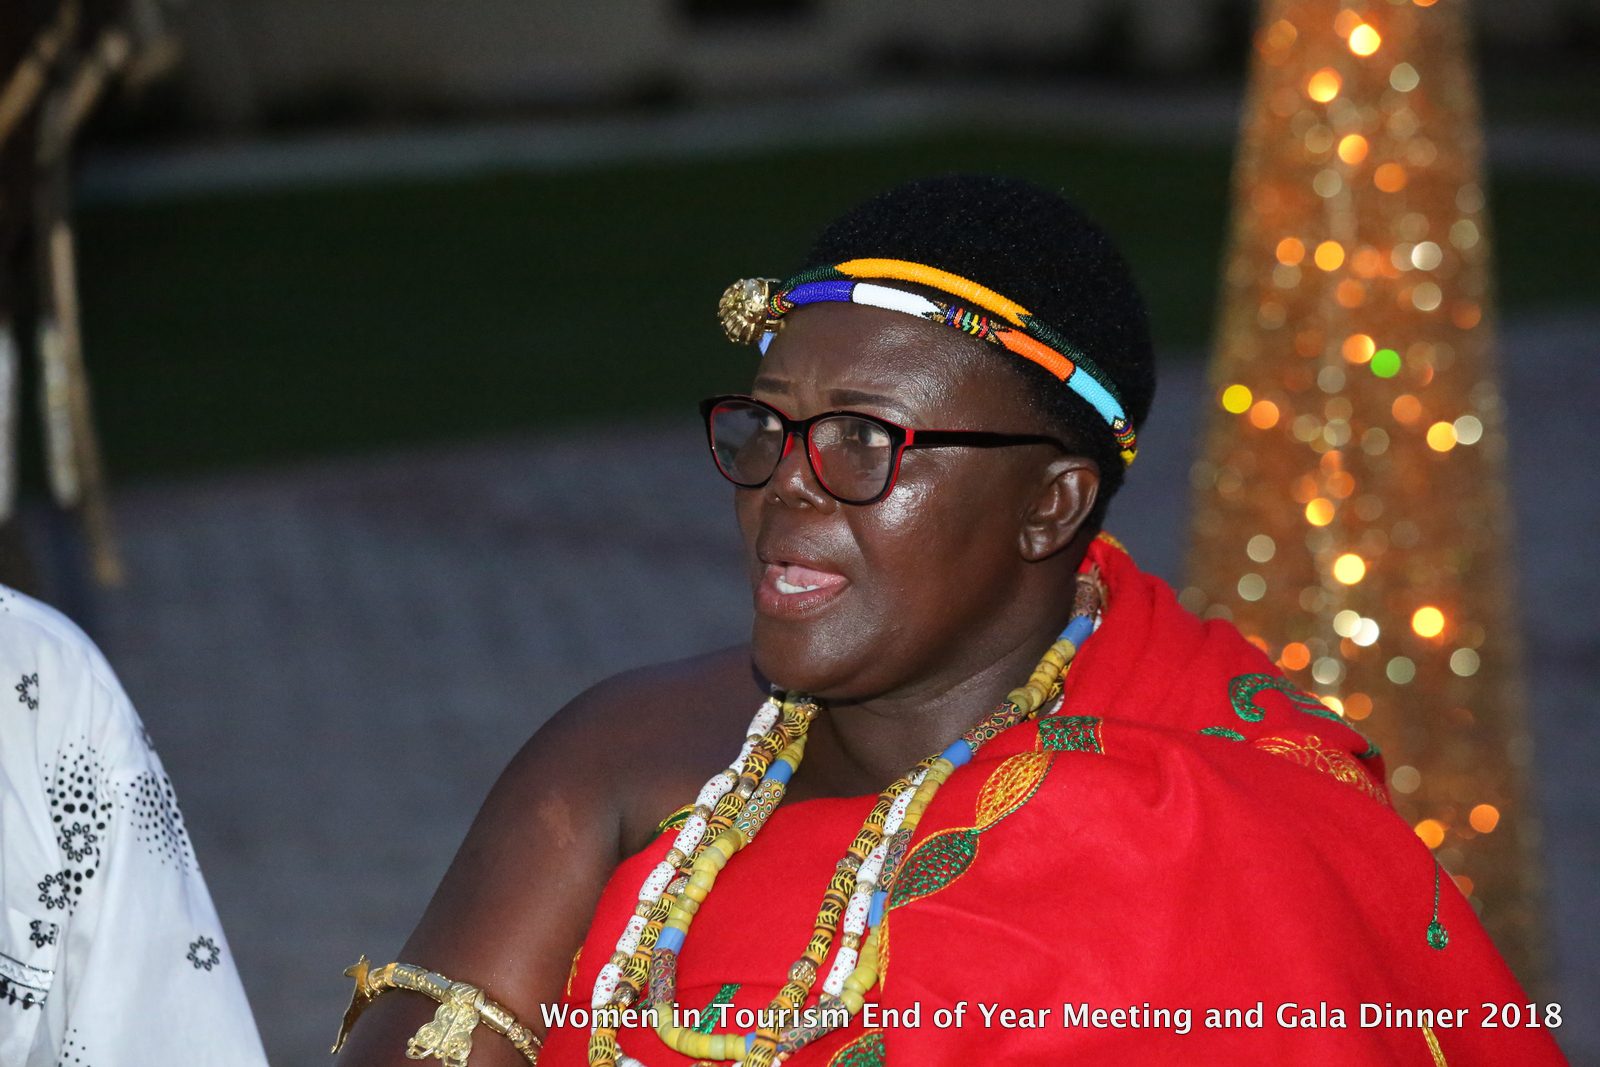 Women in Tourism Hold End of the Year Meeting and Gala Dinner